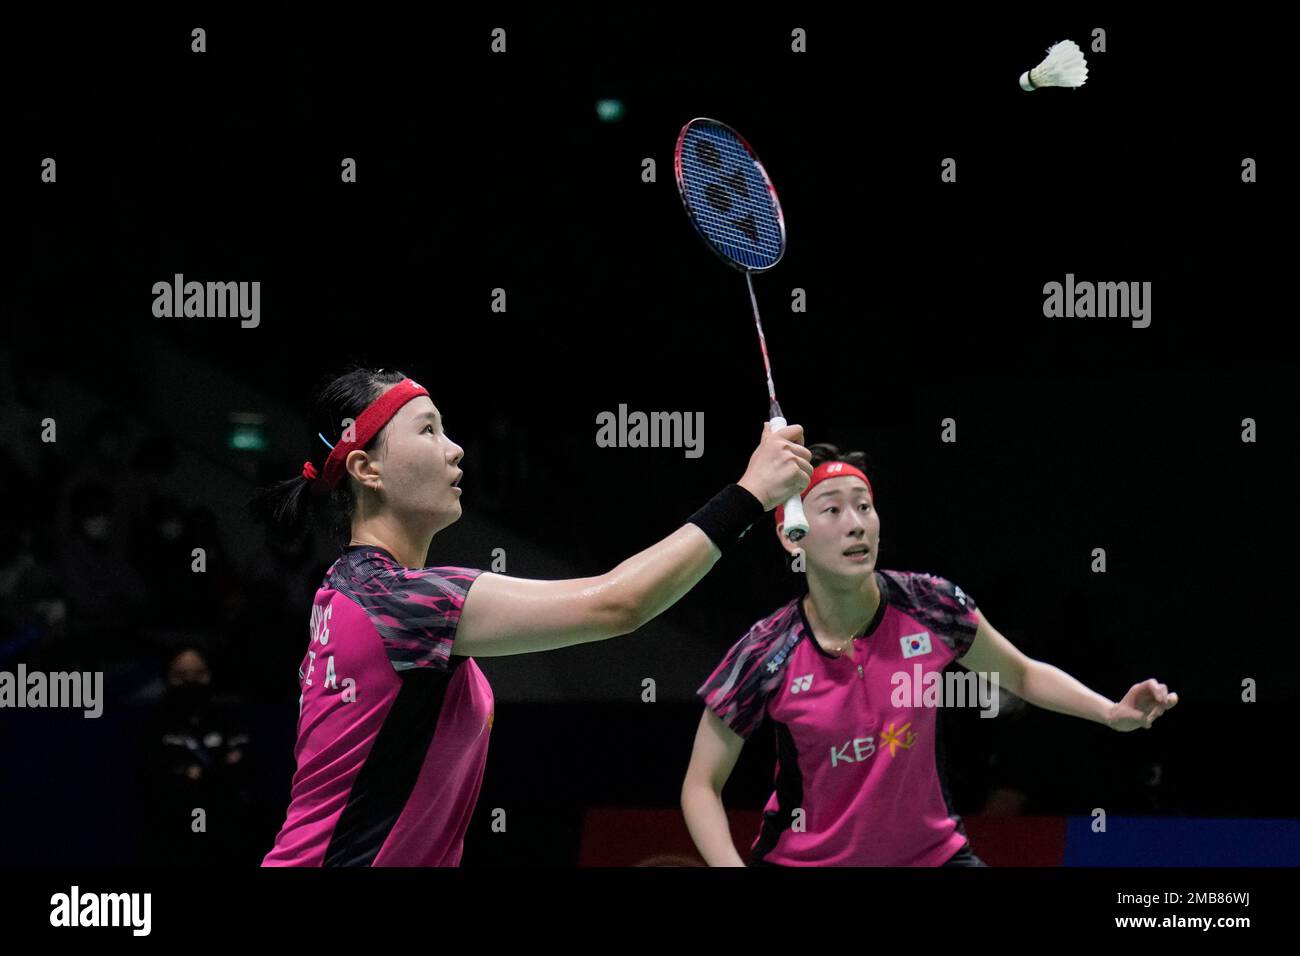 South Koreas Lee So-hee and Shin Seung-chan, left, compete against Japans Yuki Fukushima and Sayaka Hirota during their womens doubles semifinal match at Indonesia Open badminton tournament at Istora Gelora Bung Karno